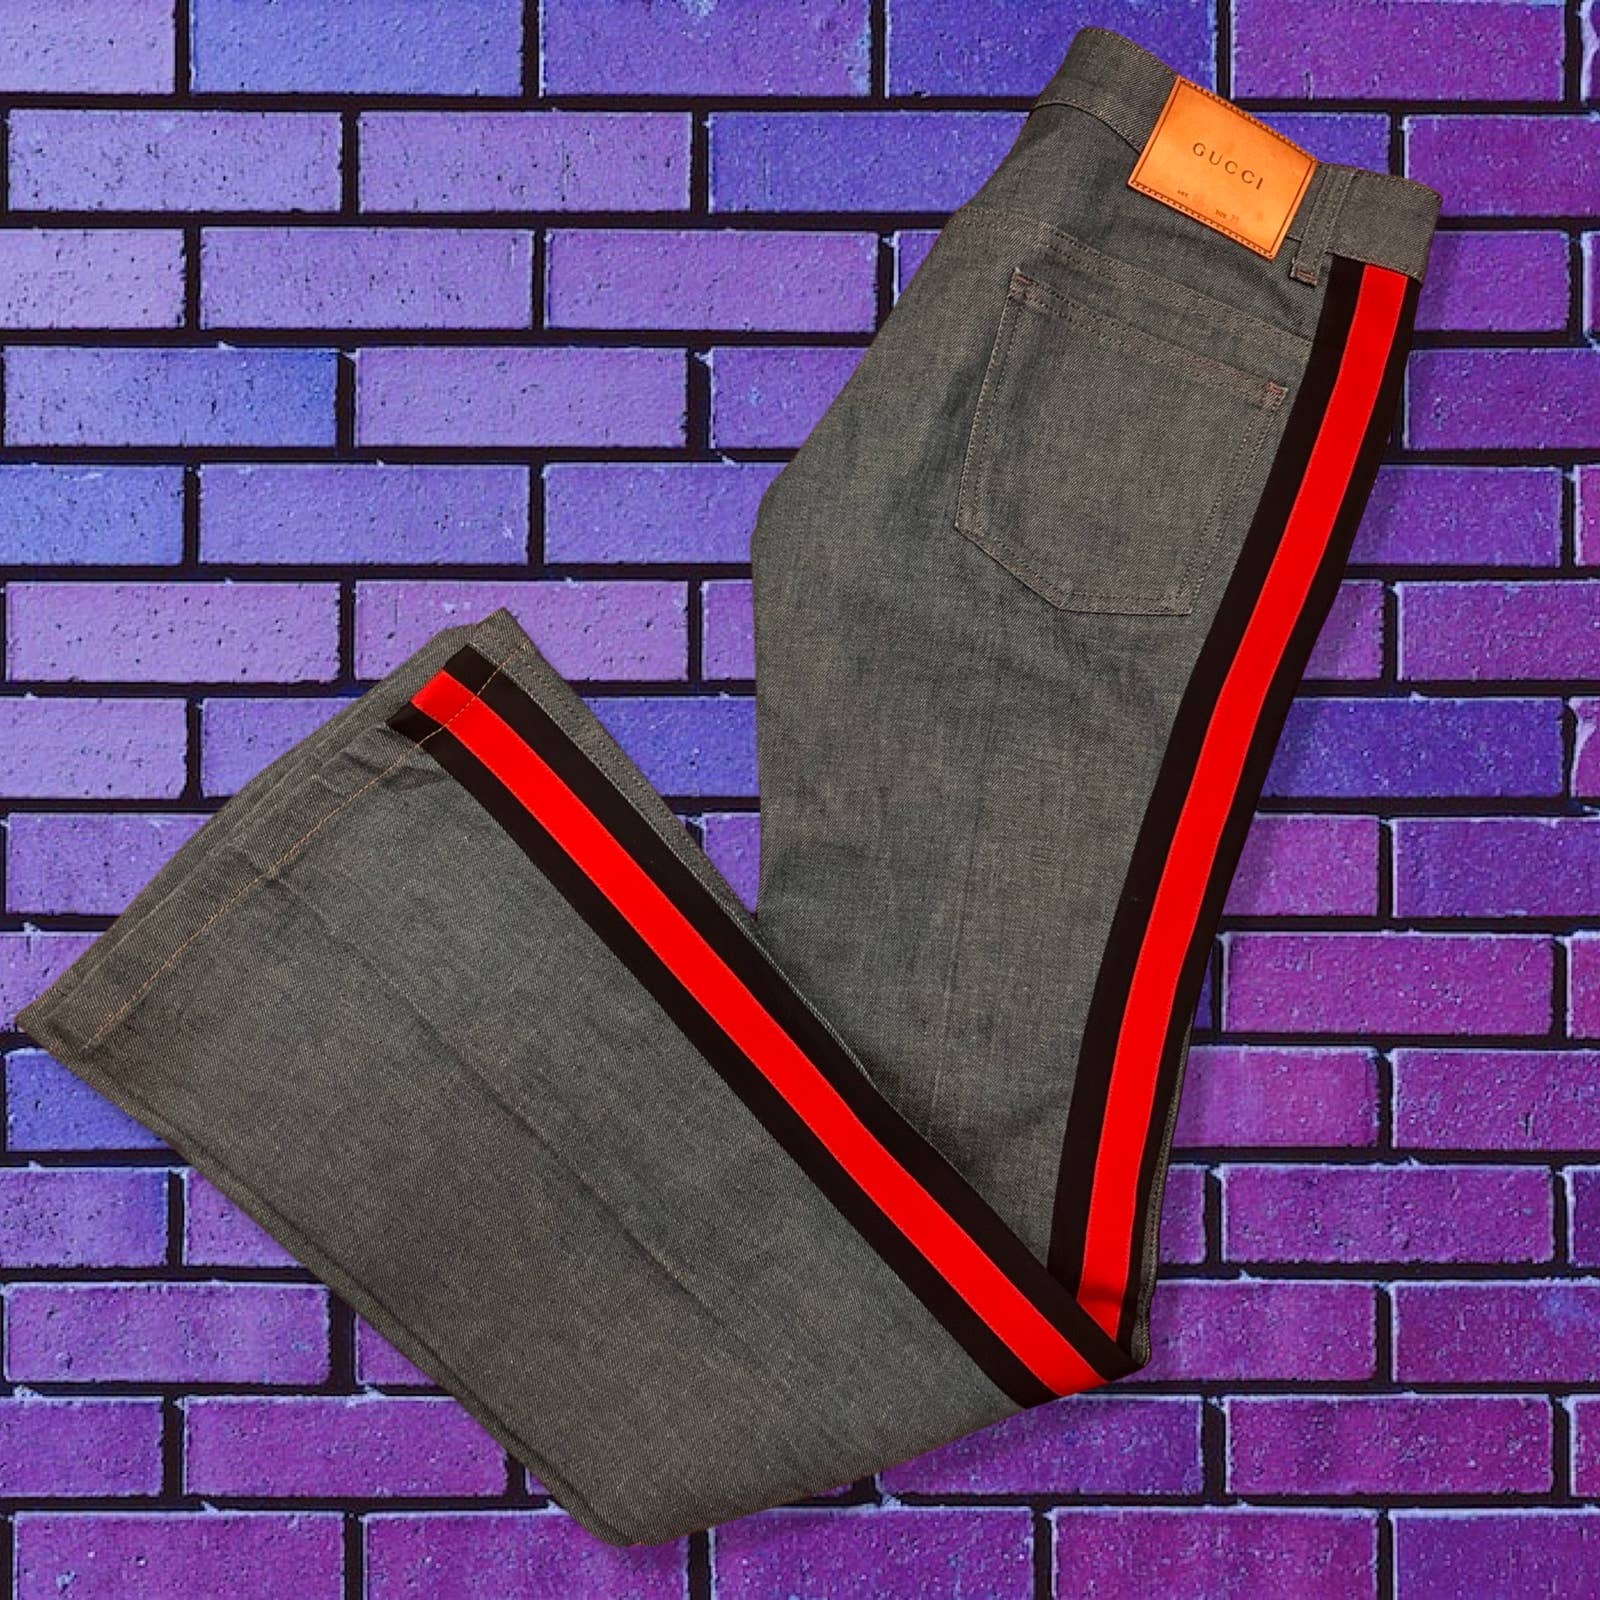 Gucci Low Rise Jeans